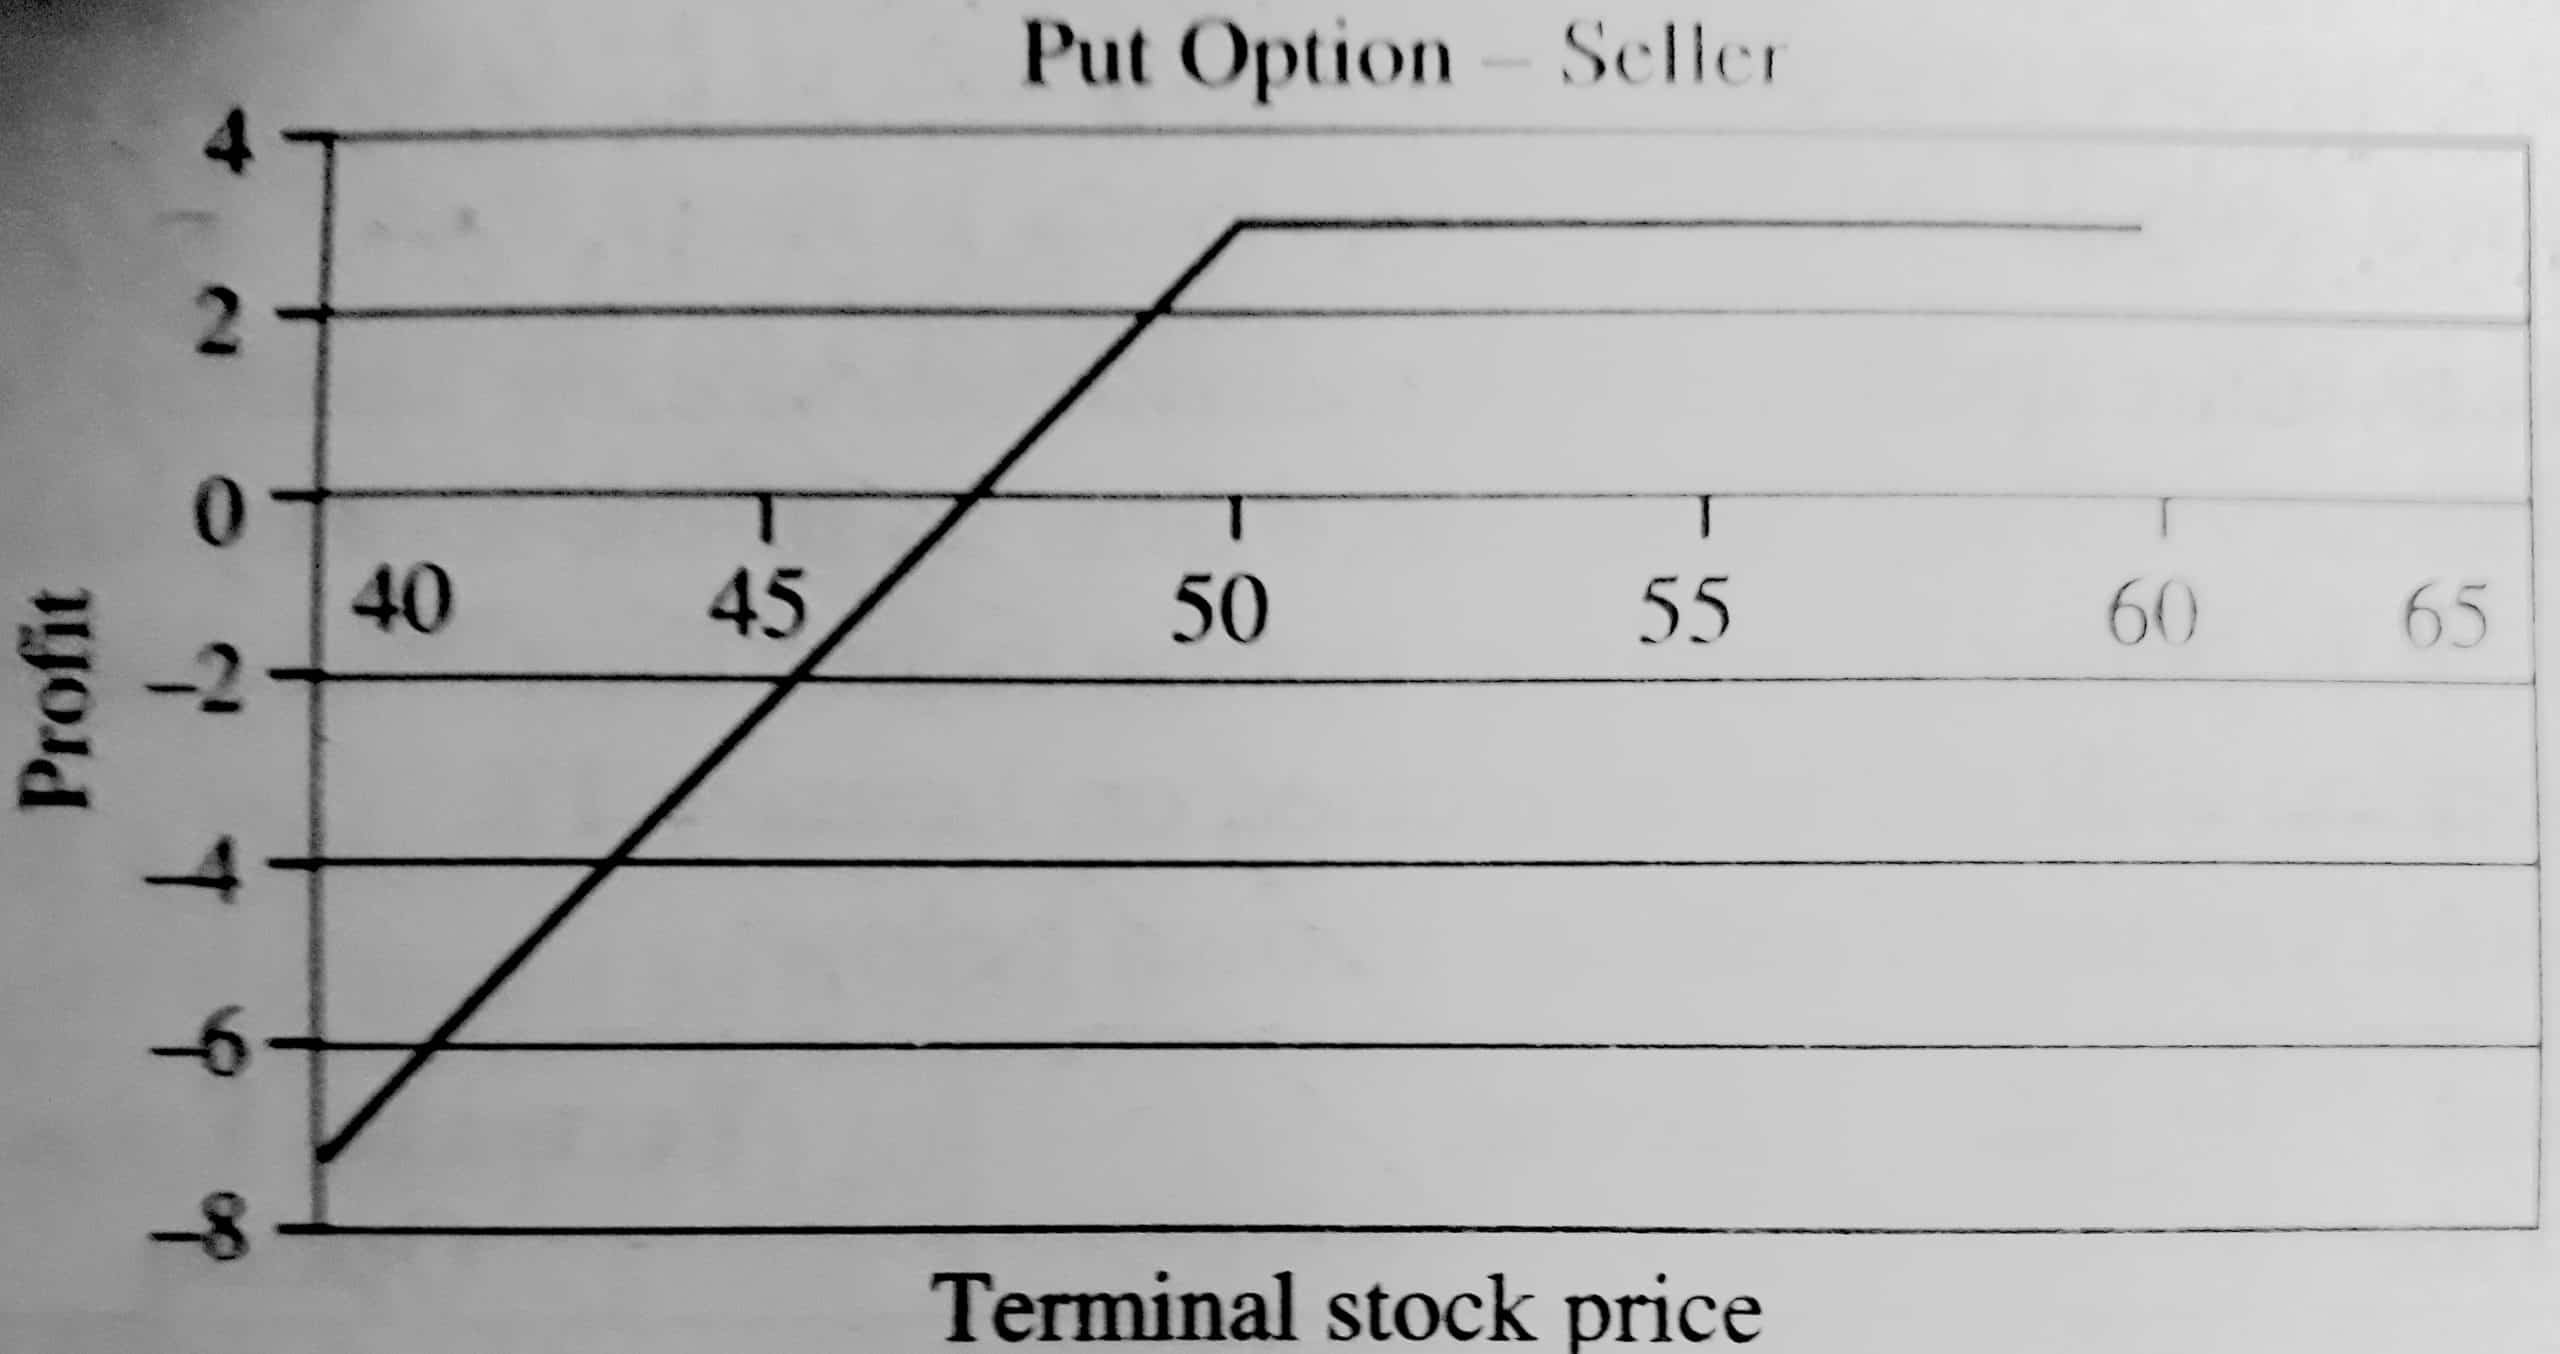 Pay-Off for the Put Option Seller